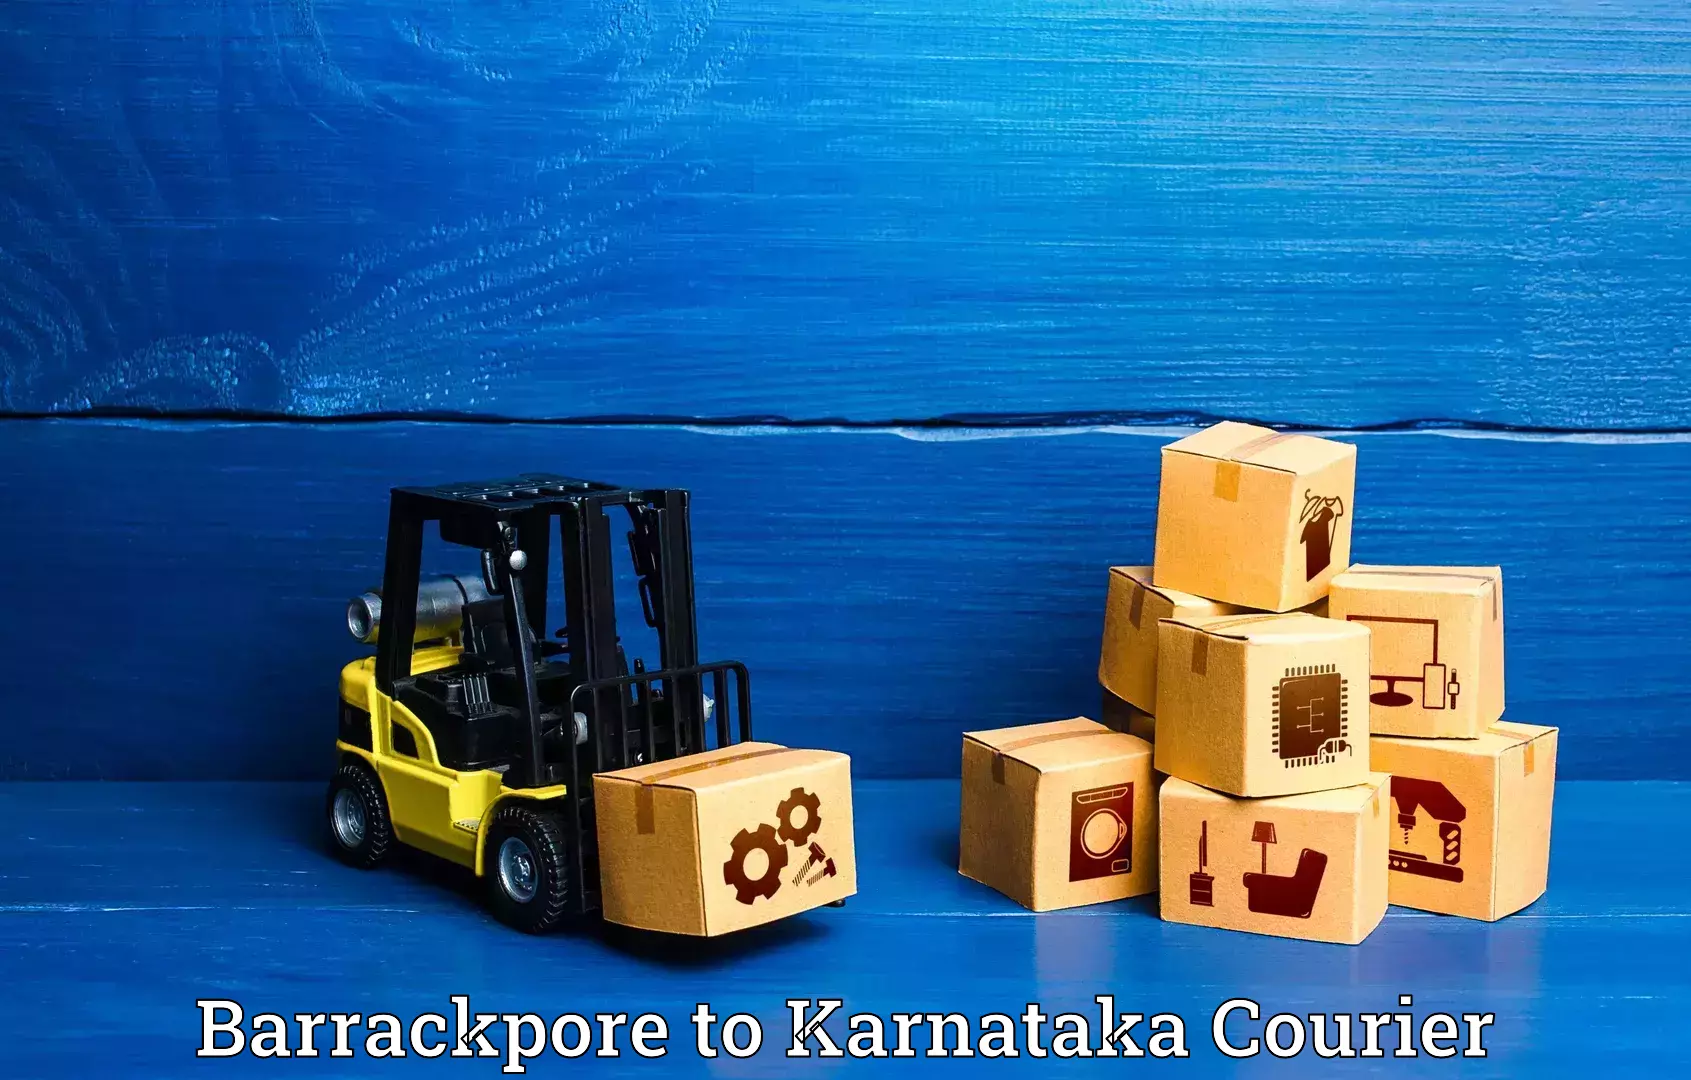 Luggage transport consultancy Barrackpore to Gundlupete